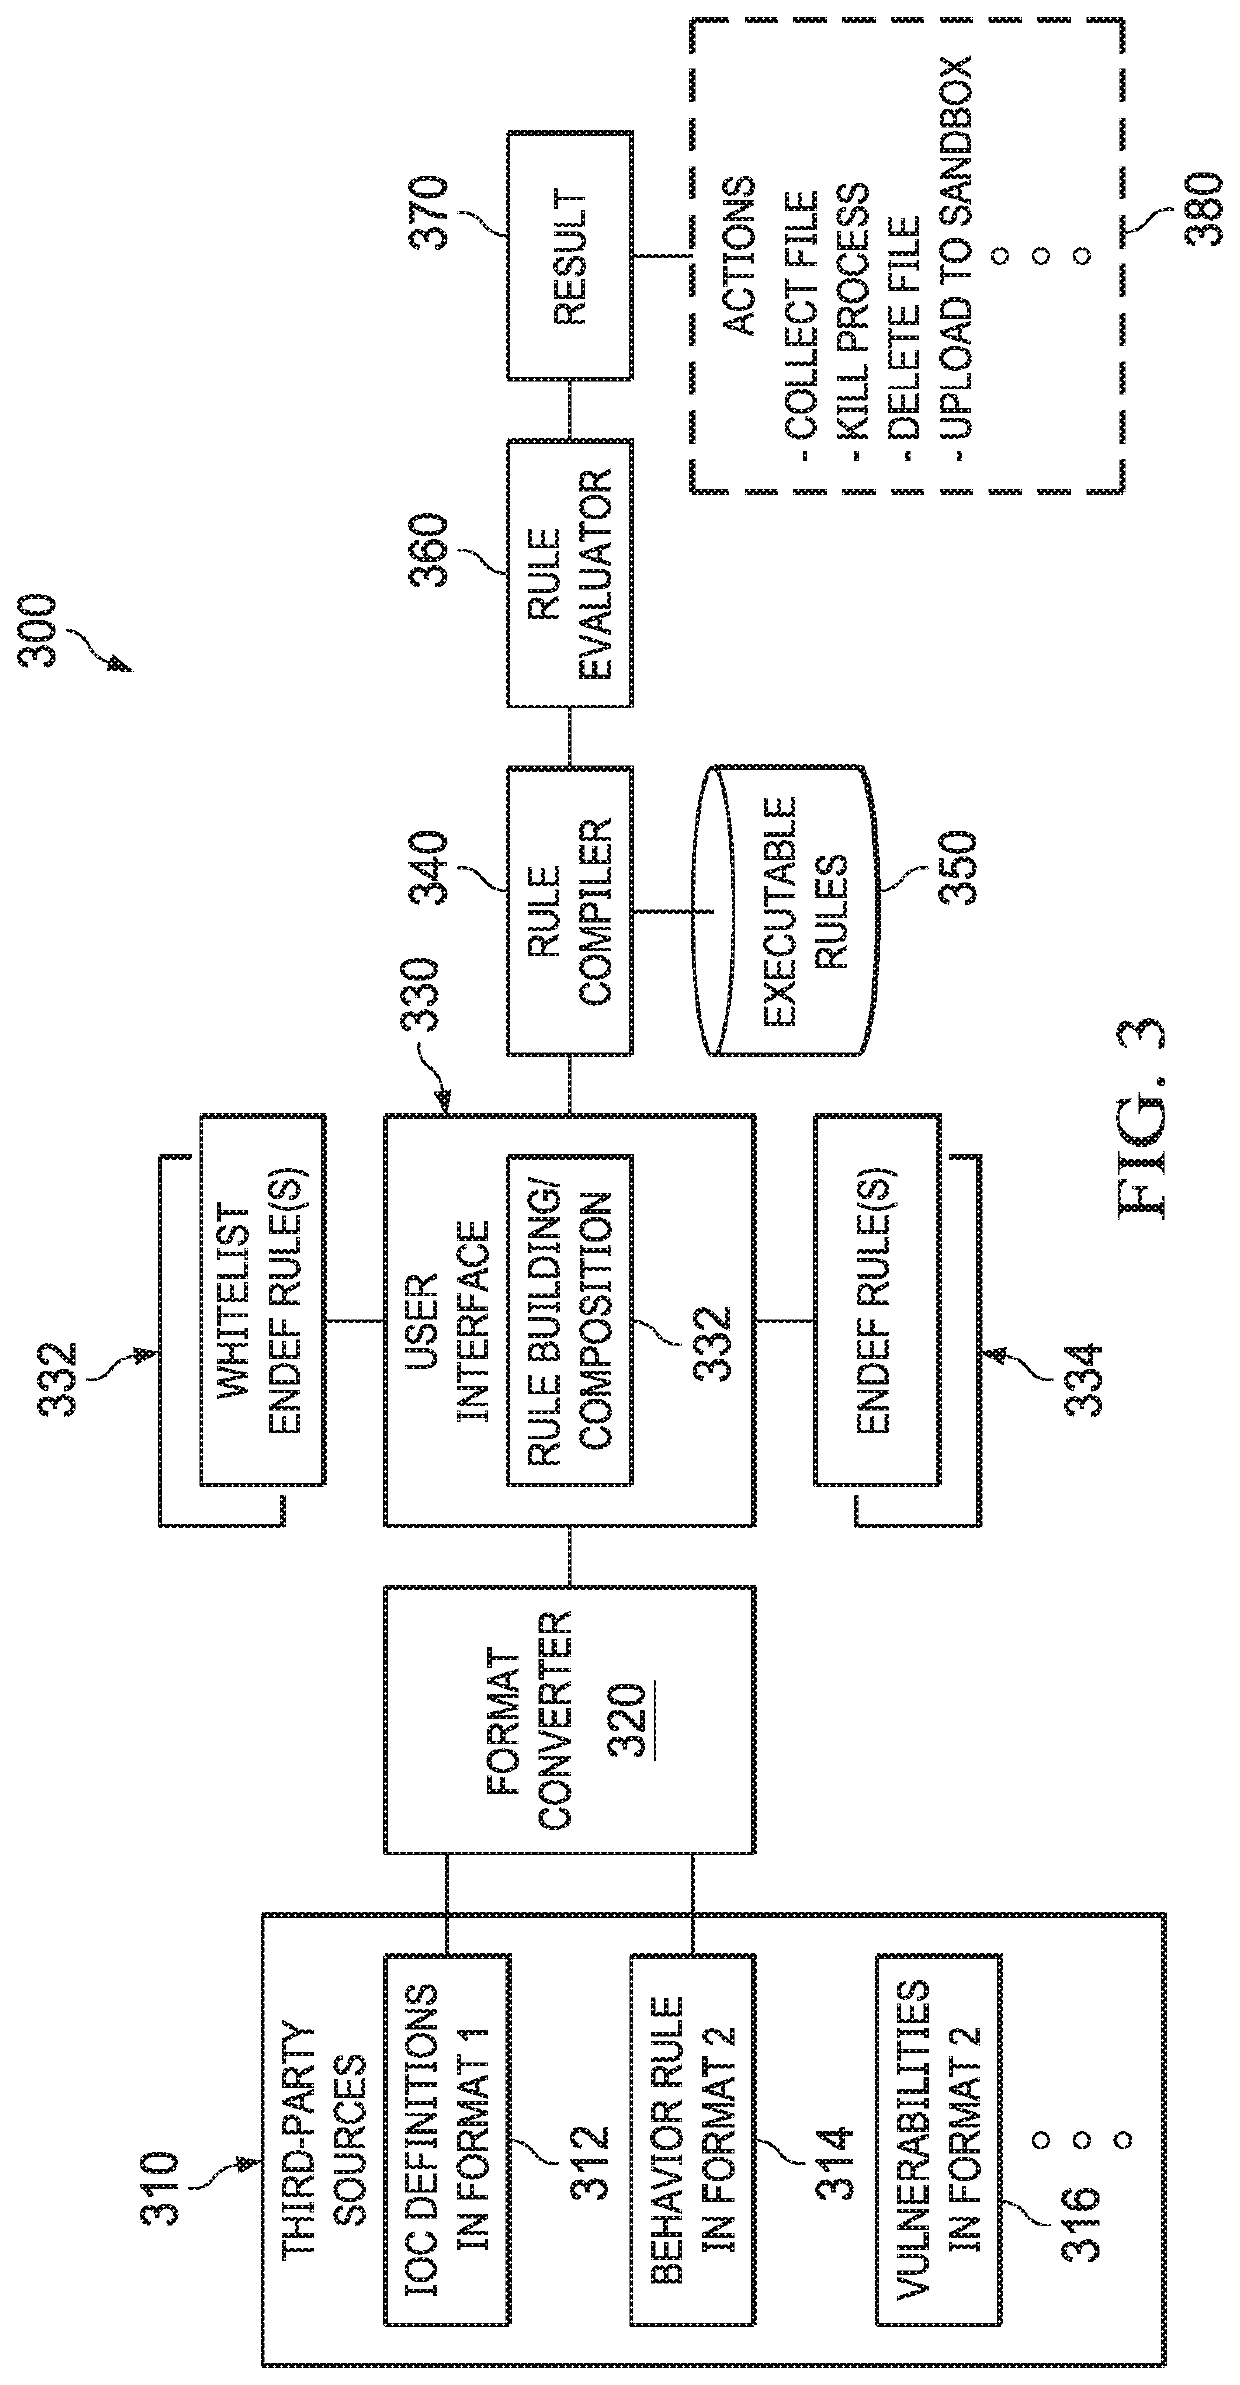 Systems and methods of information security monitoring with third-party indicators of compromise